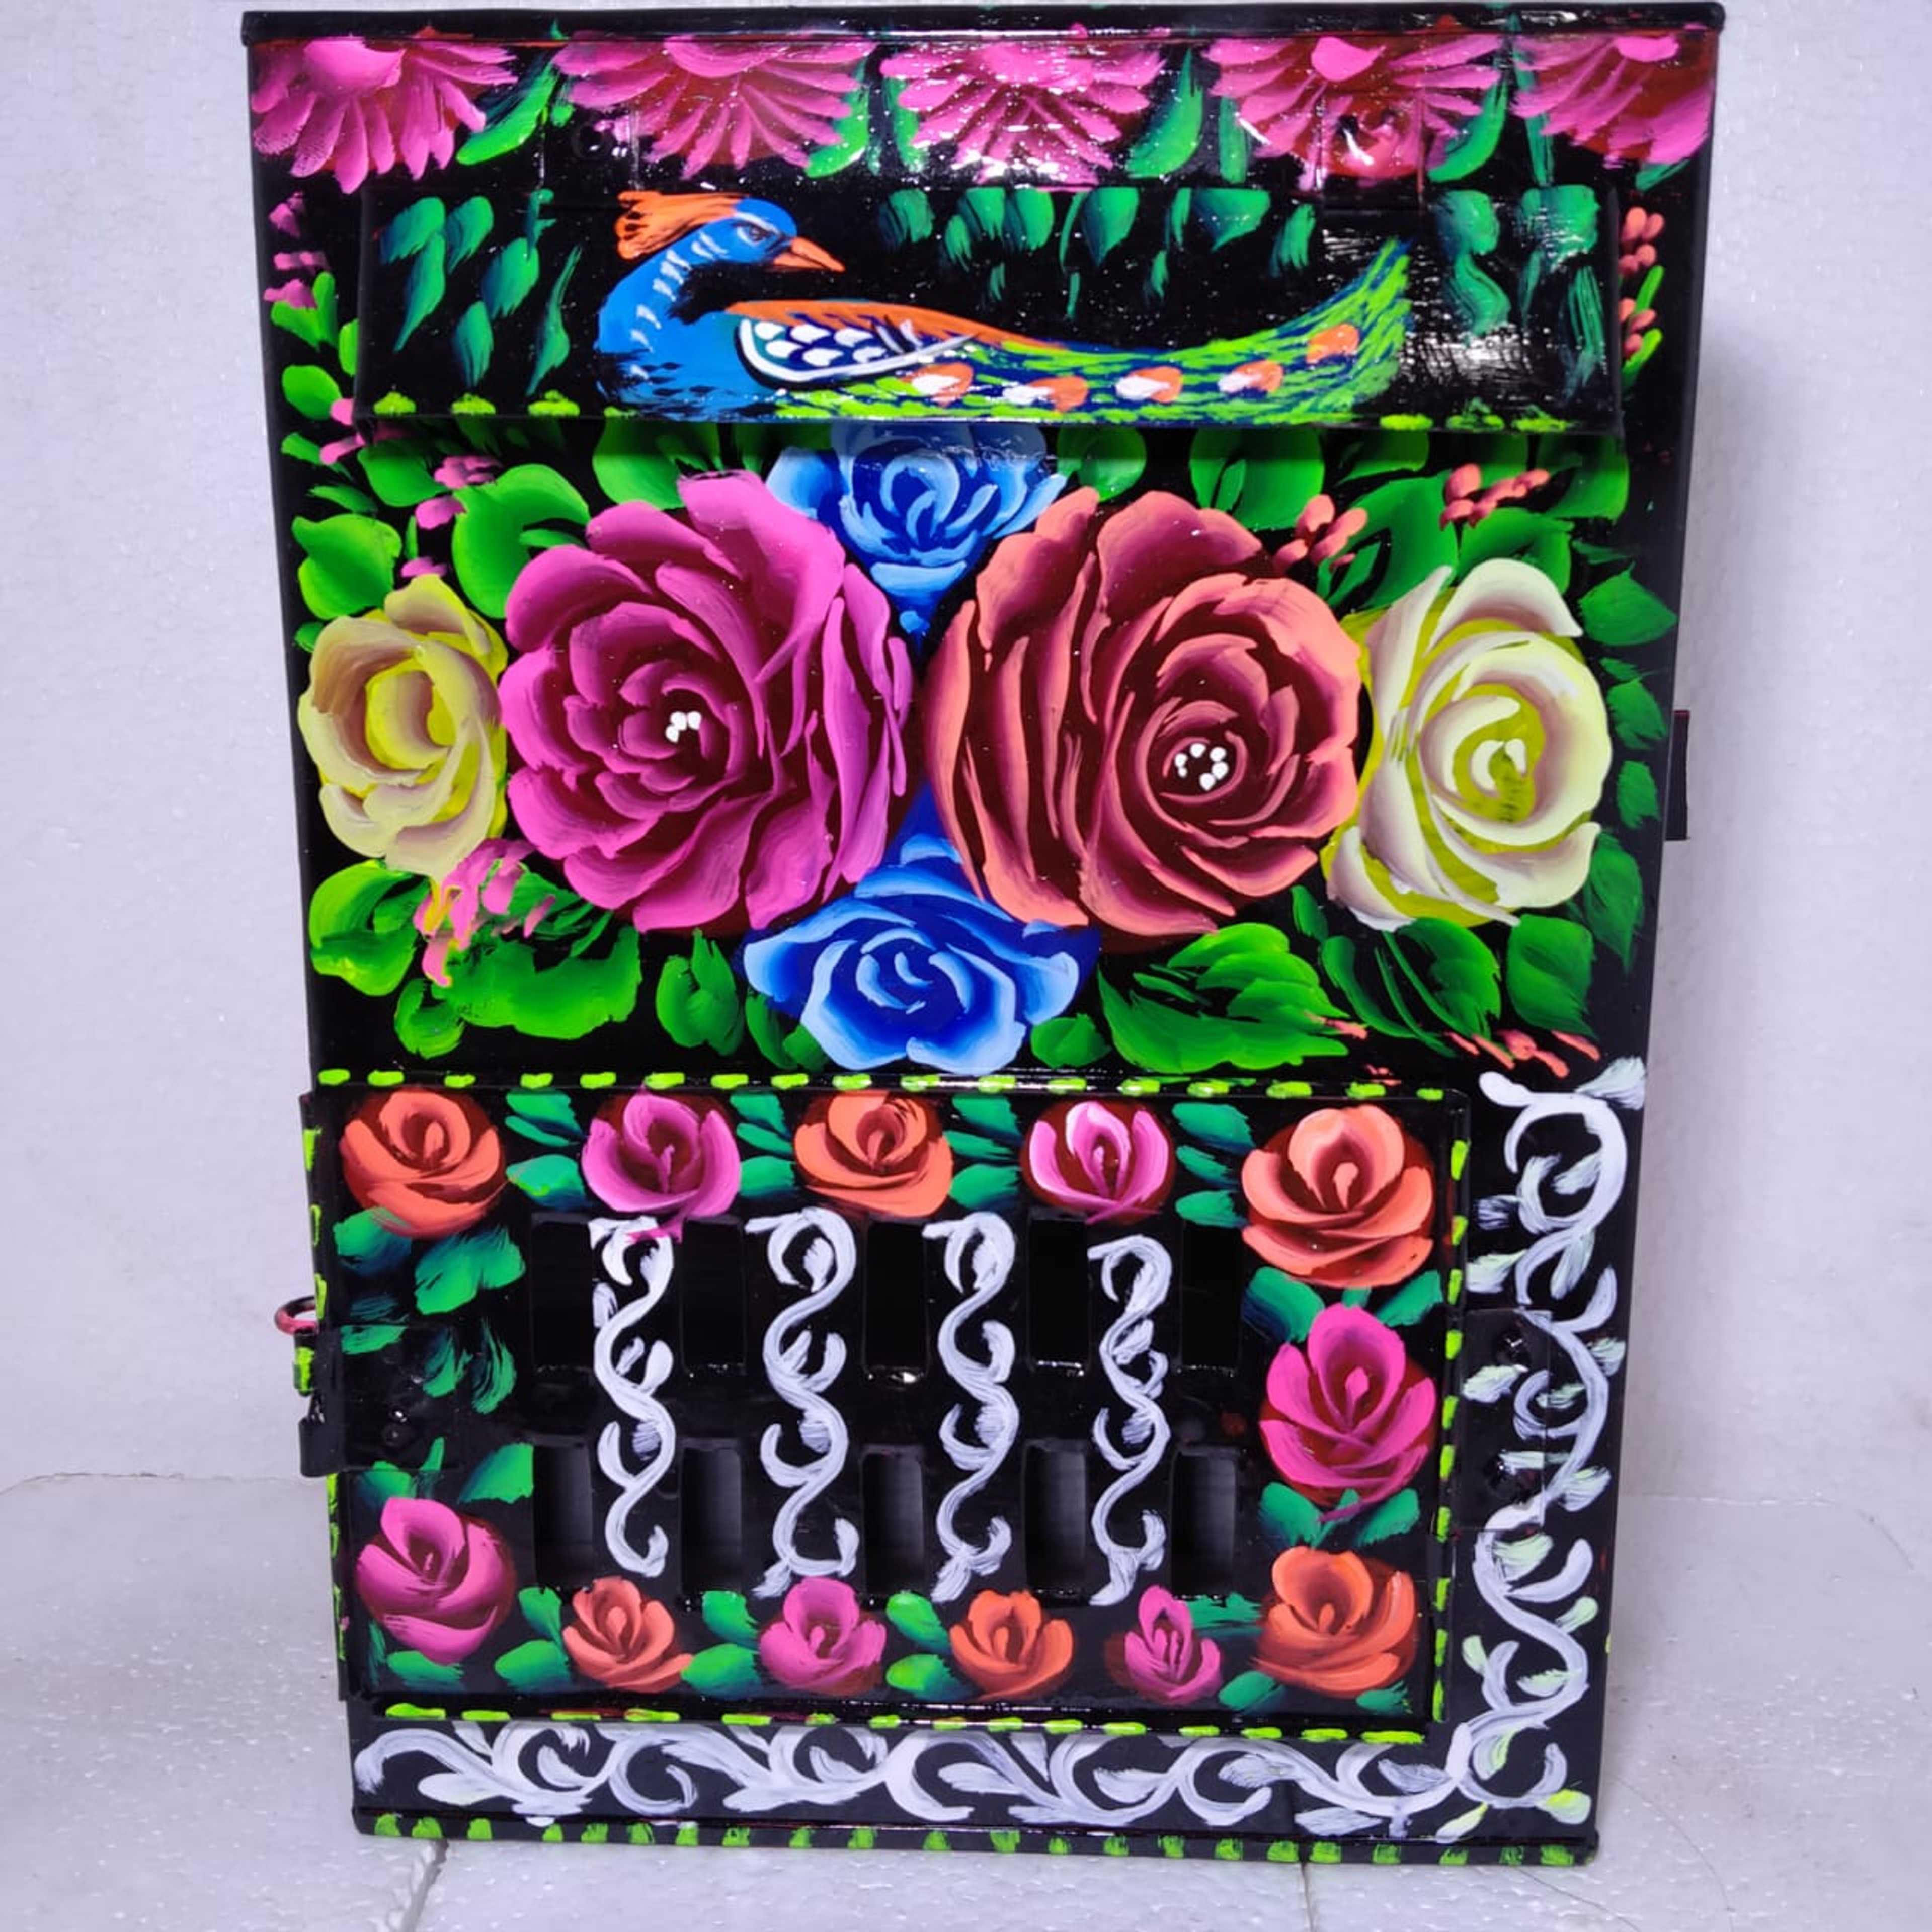 Truck Art Hand Painted Letter Box